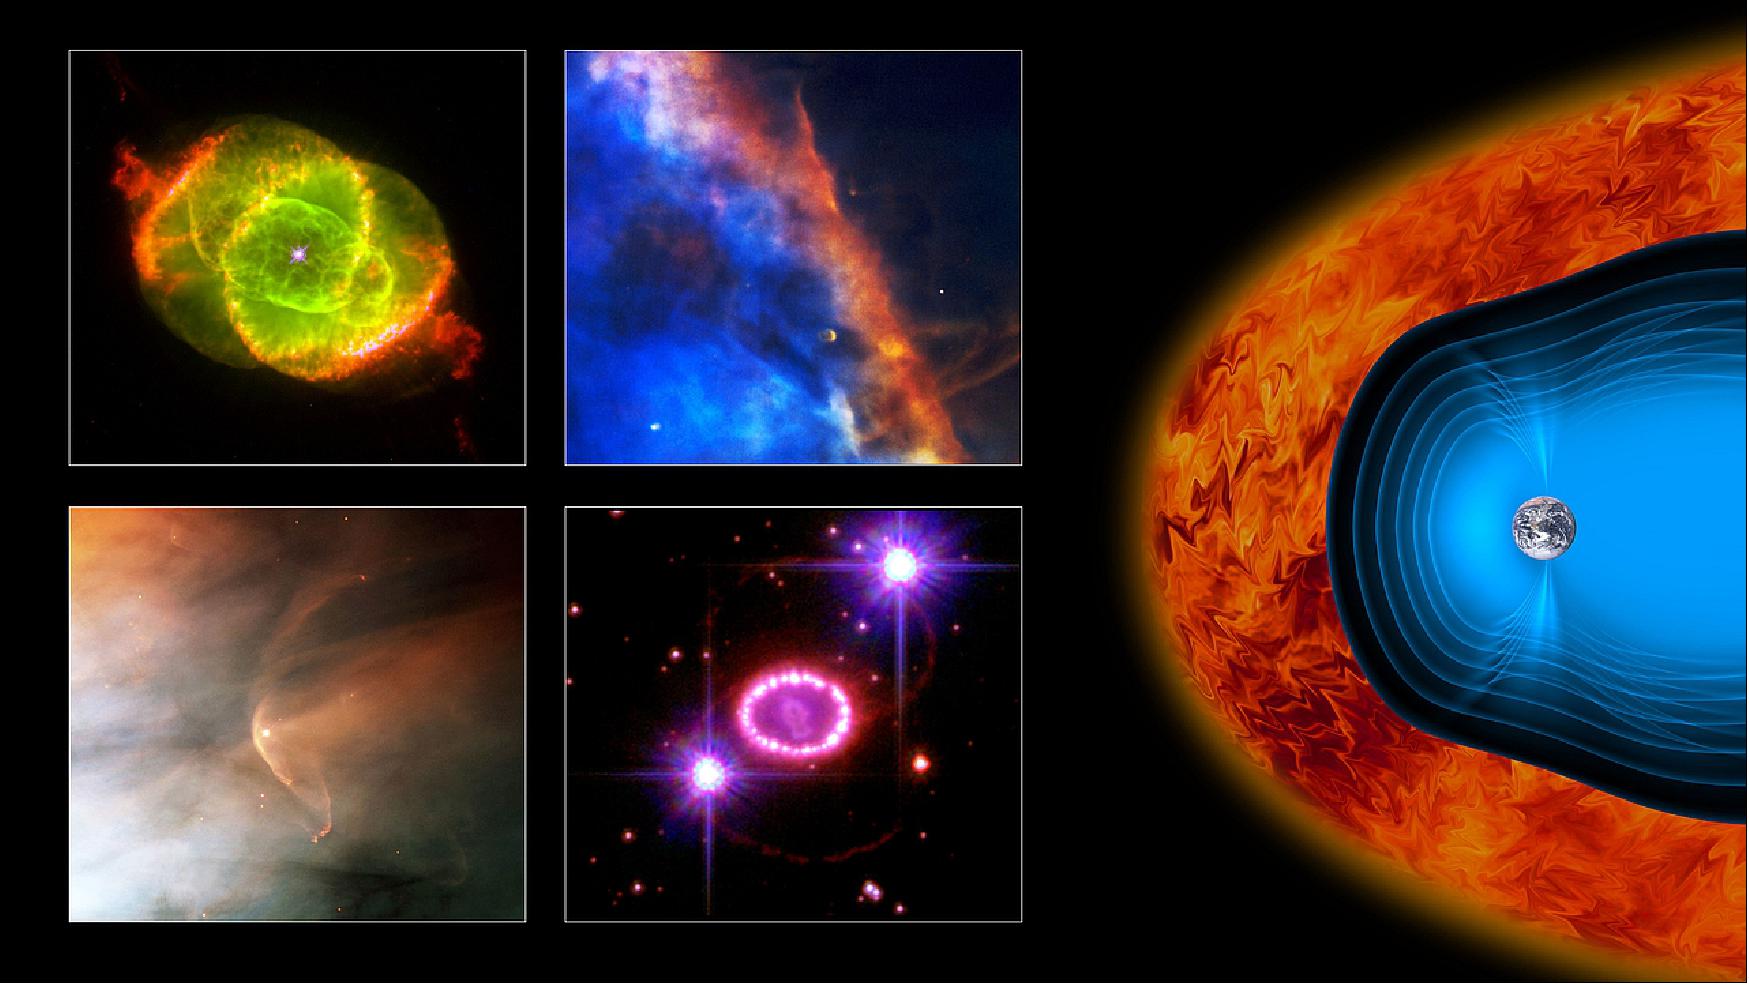 Figure 20: This composite image shows a variety of different 'shocks' throughout the Universe. Such shocks form when a supersonic – faster-than-sound – flow encounters an obstacle, and are seen often in the Universe around stars, supernova remnants, comets, and planets – including our own image credit: ESA; Insets: J. P. Harrington and K. J. Borkowski (University of Maryland), and NASA; NASA and The Hubble Heritage Team (STScI/AURA); NASA, ESA, and R. Kirshner (Harvard-Smithsonian Center for Astrophysics); NASA/ESA, C. R. O'Dell (Rice University)